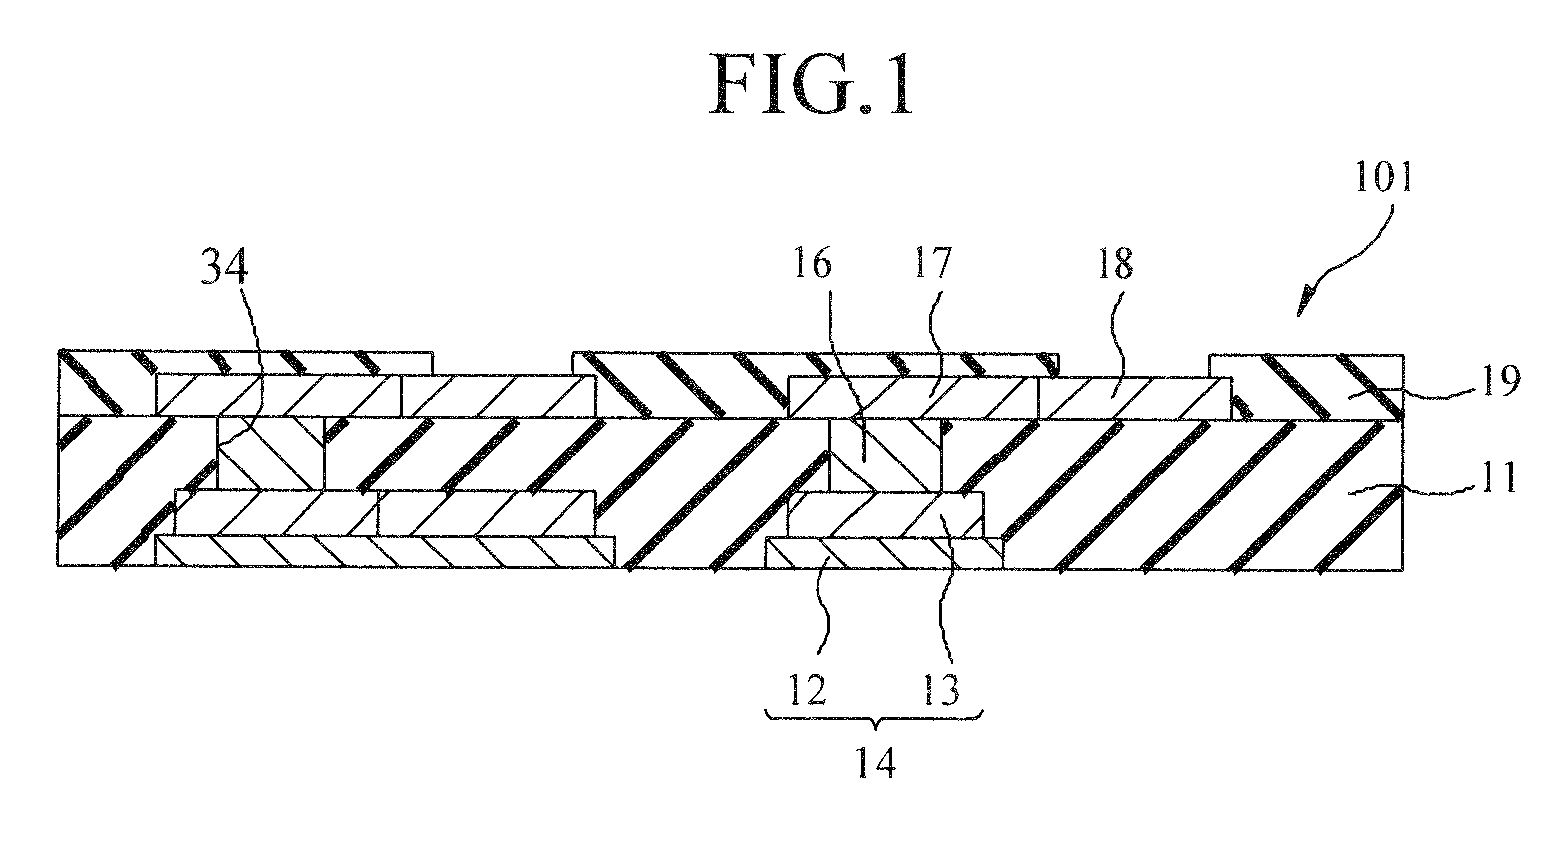 Wiring board, semiconductor device using wiring board and their manufacturing methods